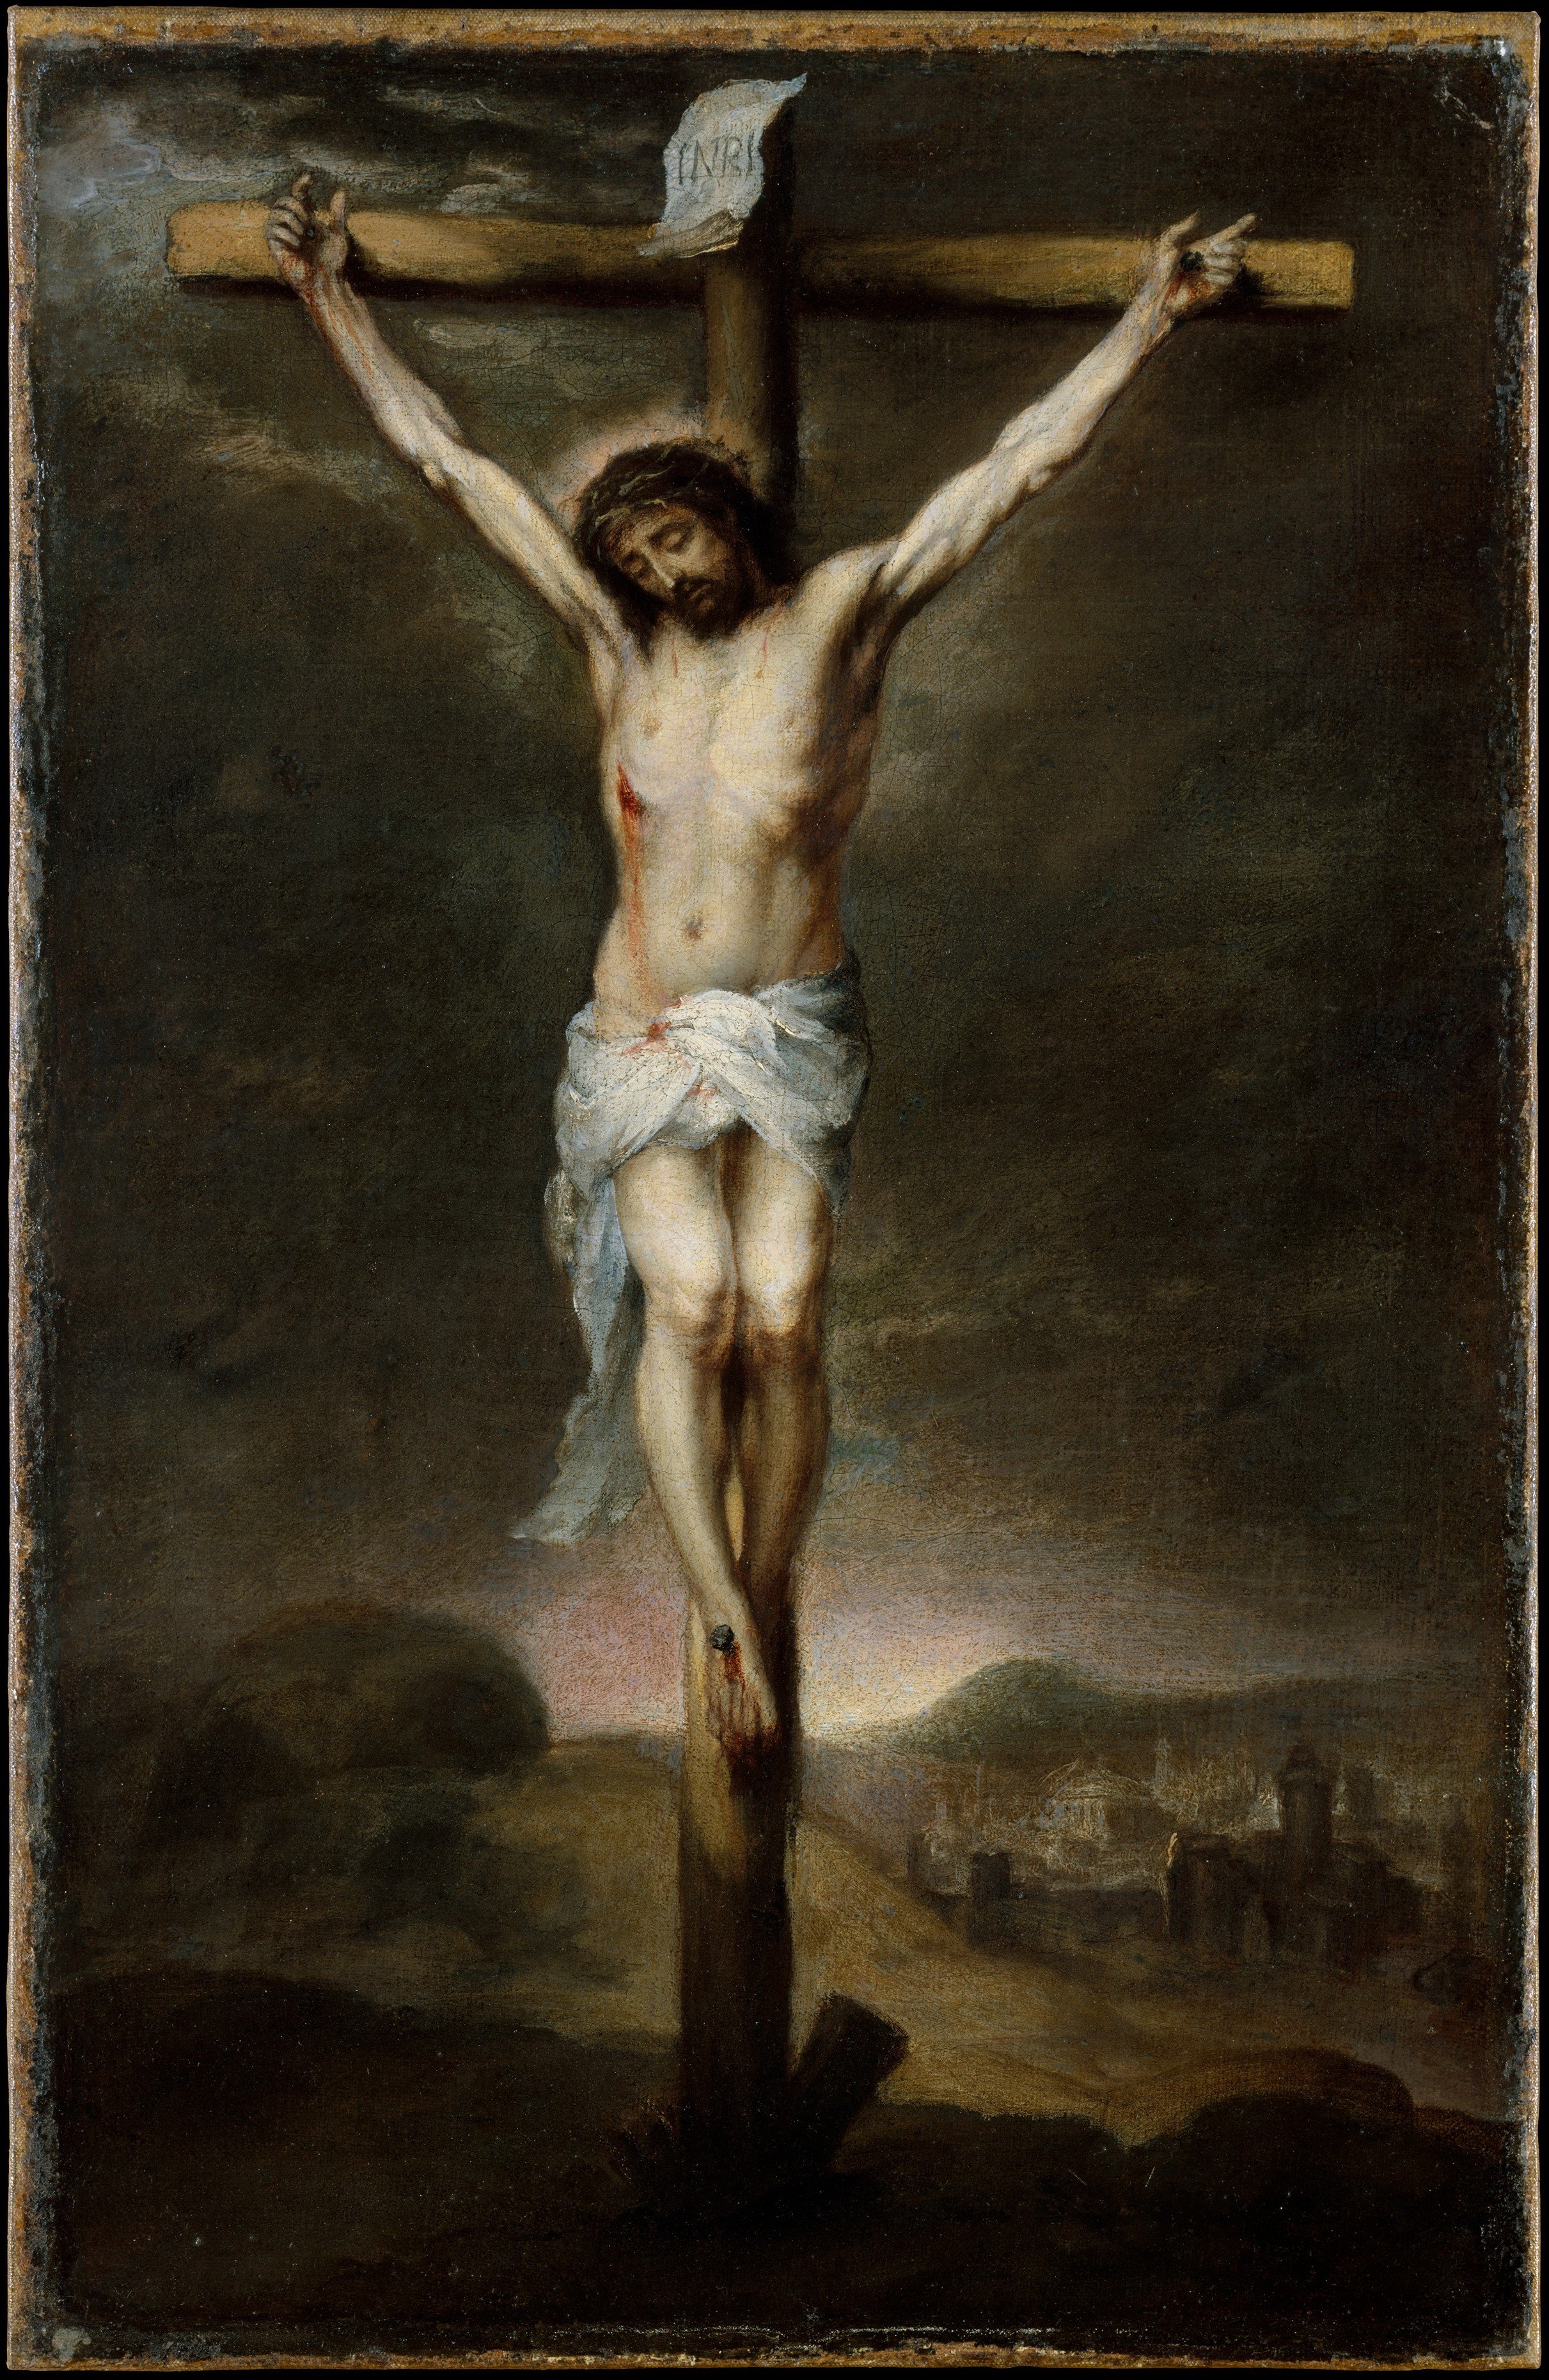 "The Crucifixion" by Murillo (1675)